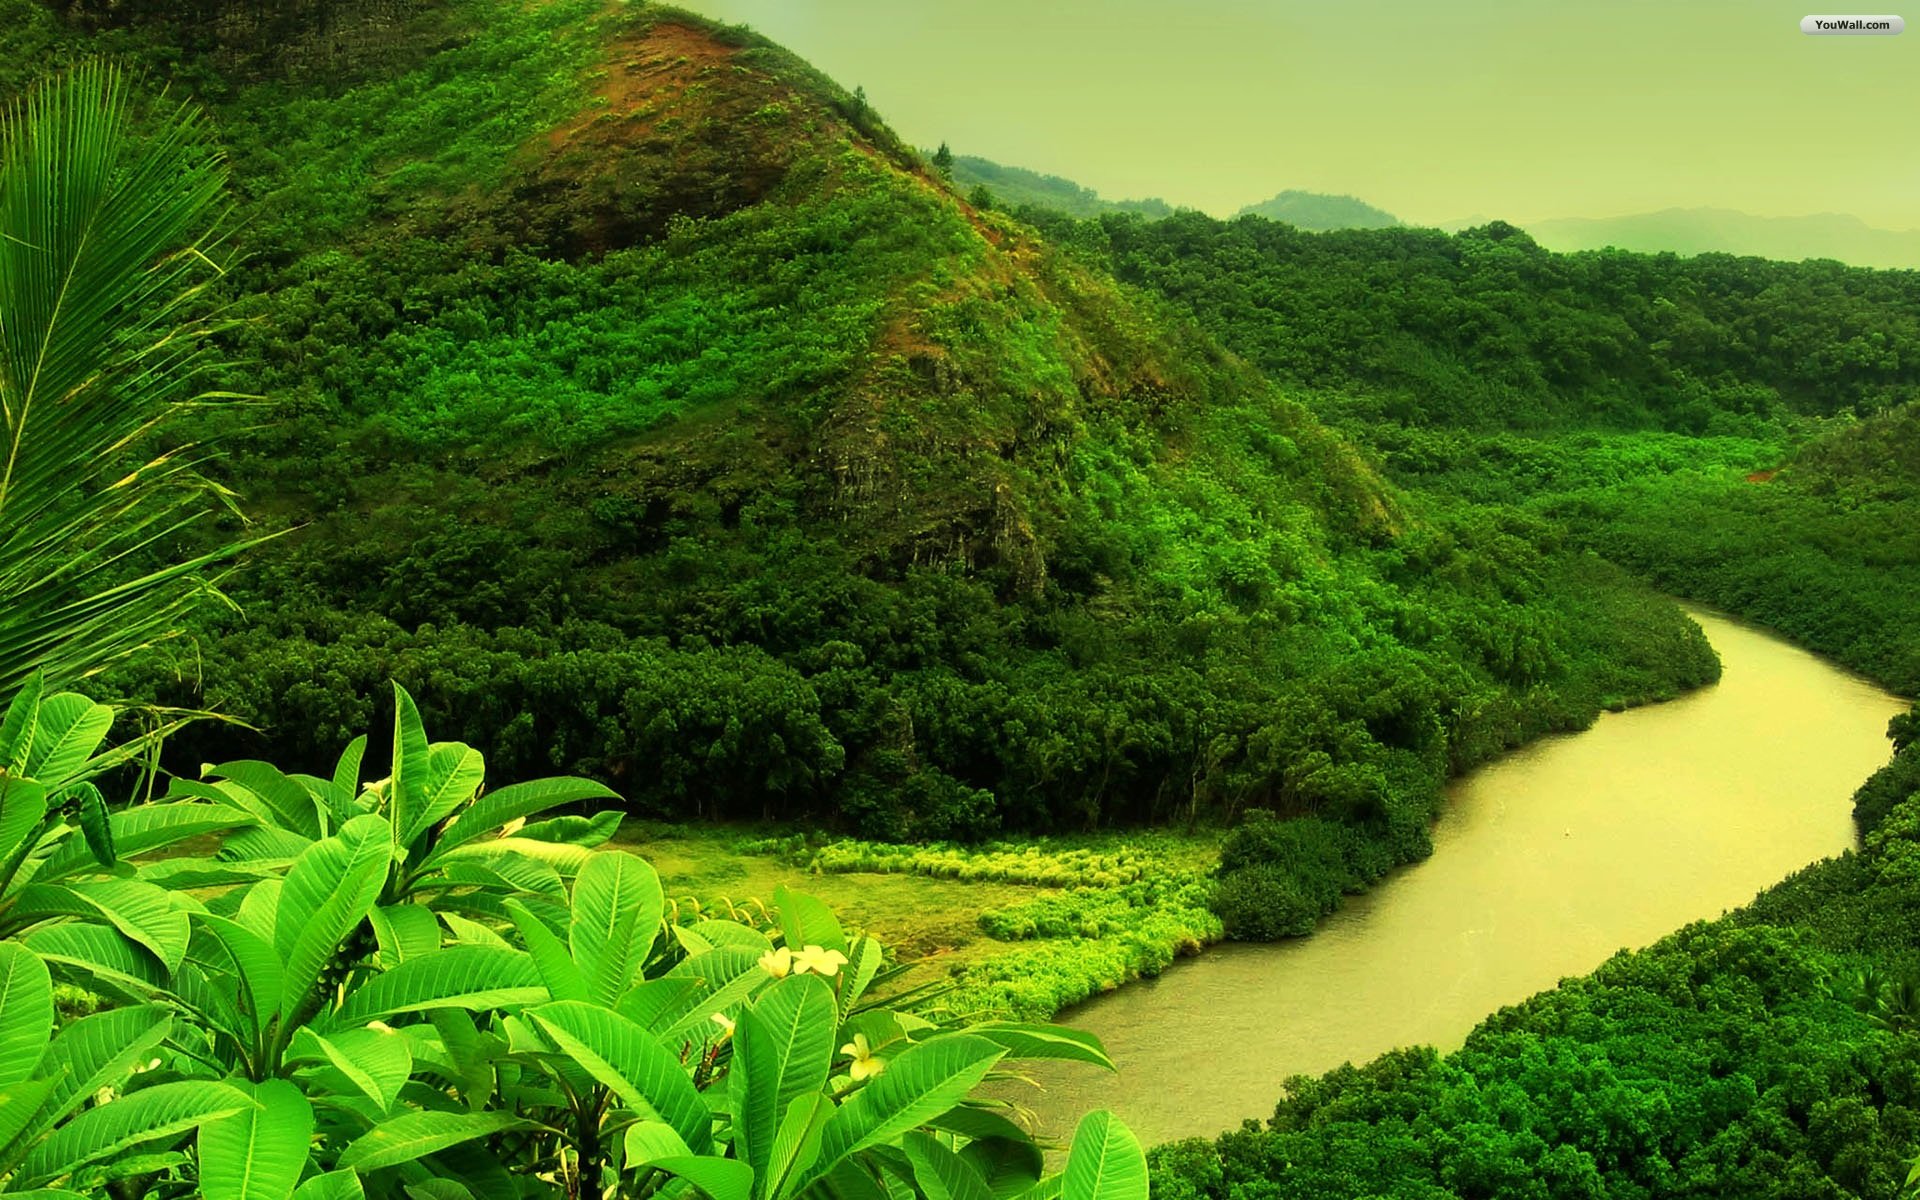 Youwall Forest River Wallpaper